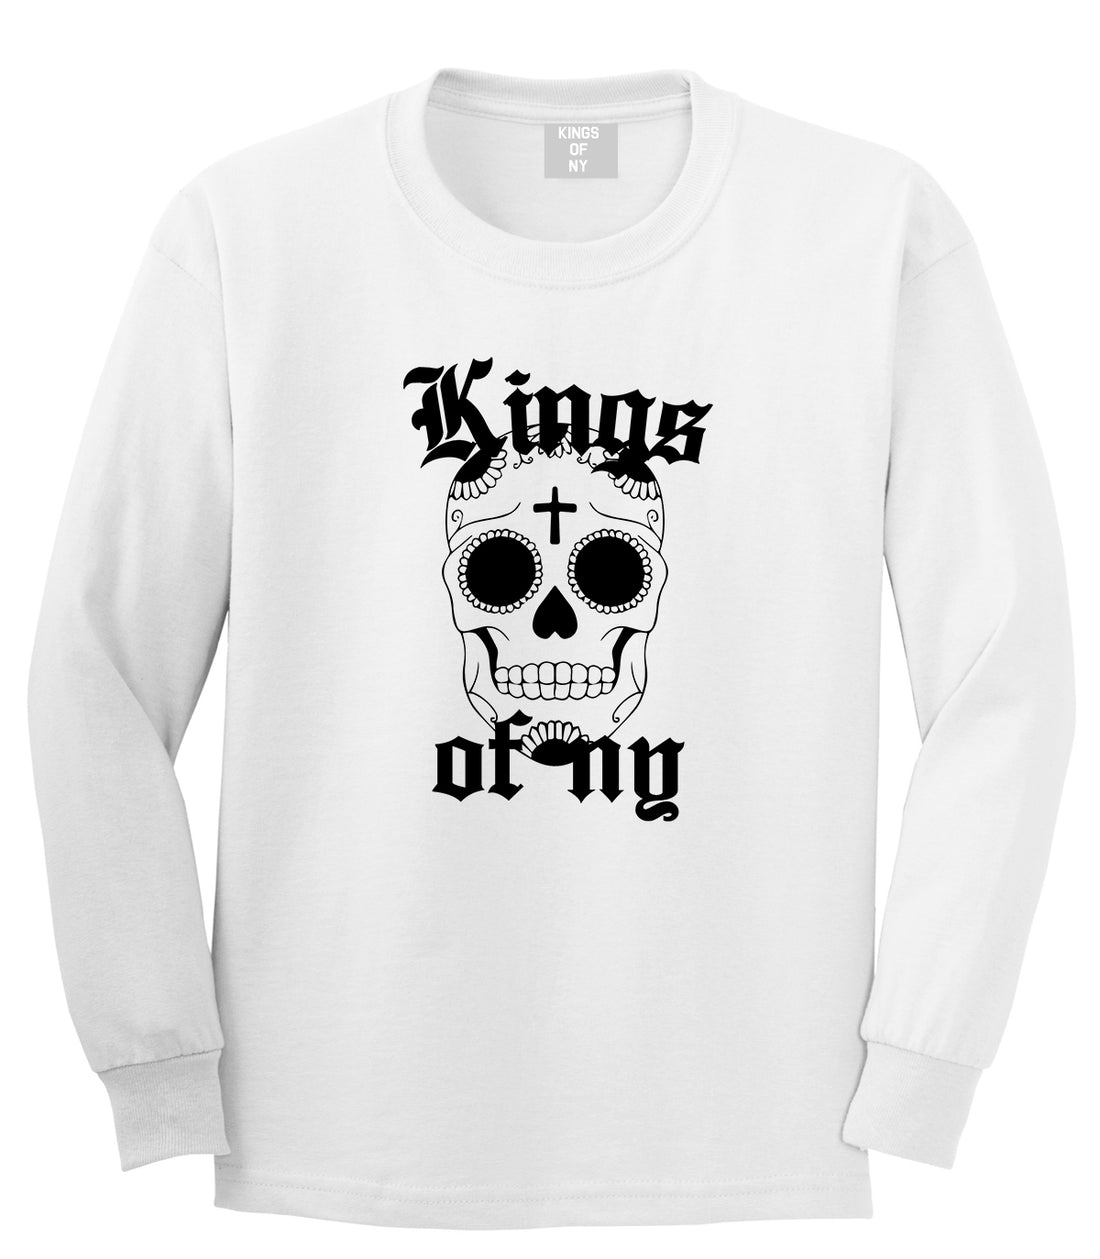 Day Of The Dead KONY Mens Long Sleeve T-Shirt White by Kings Of NY